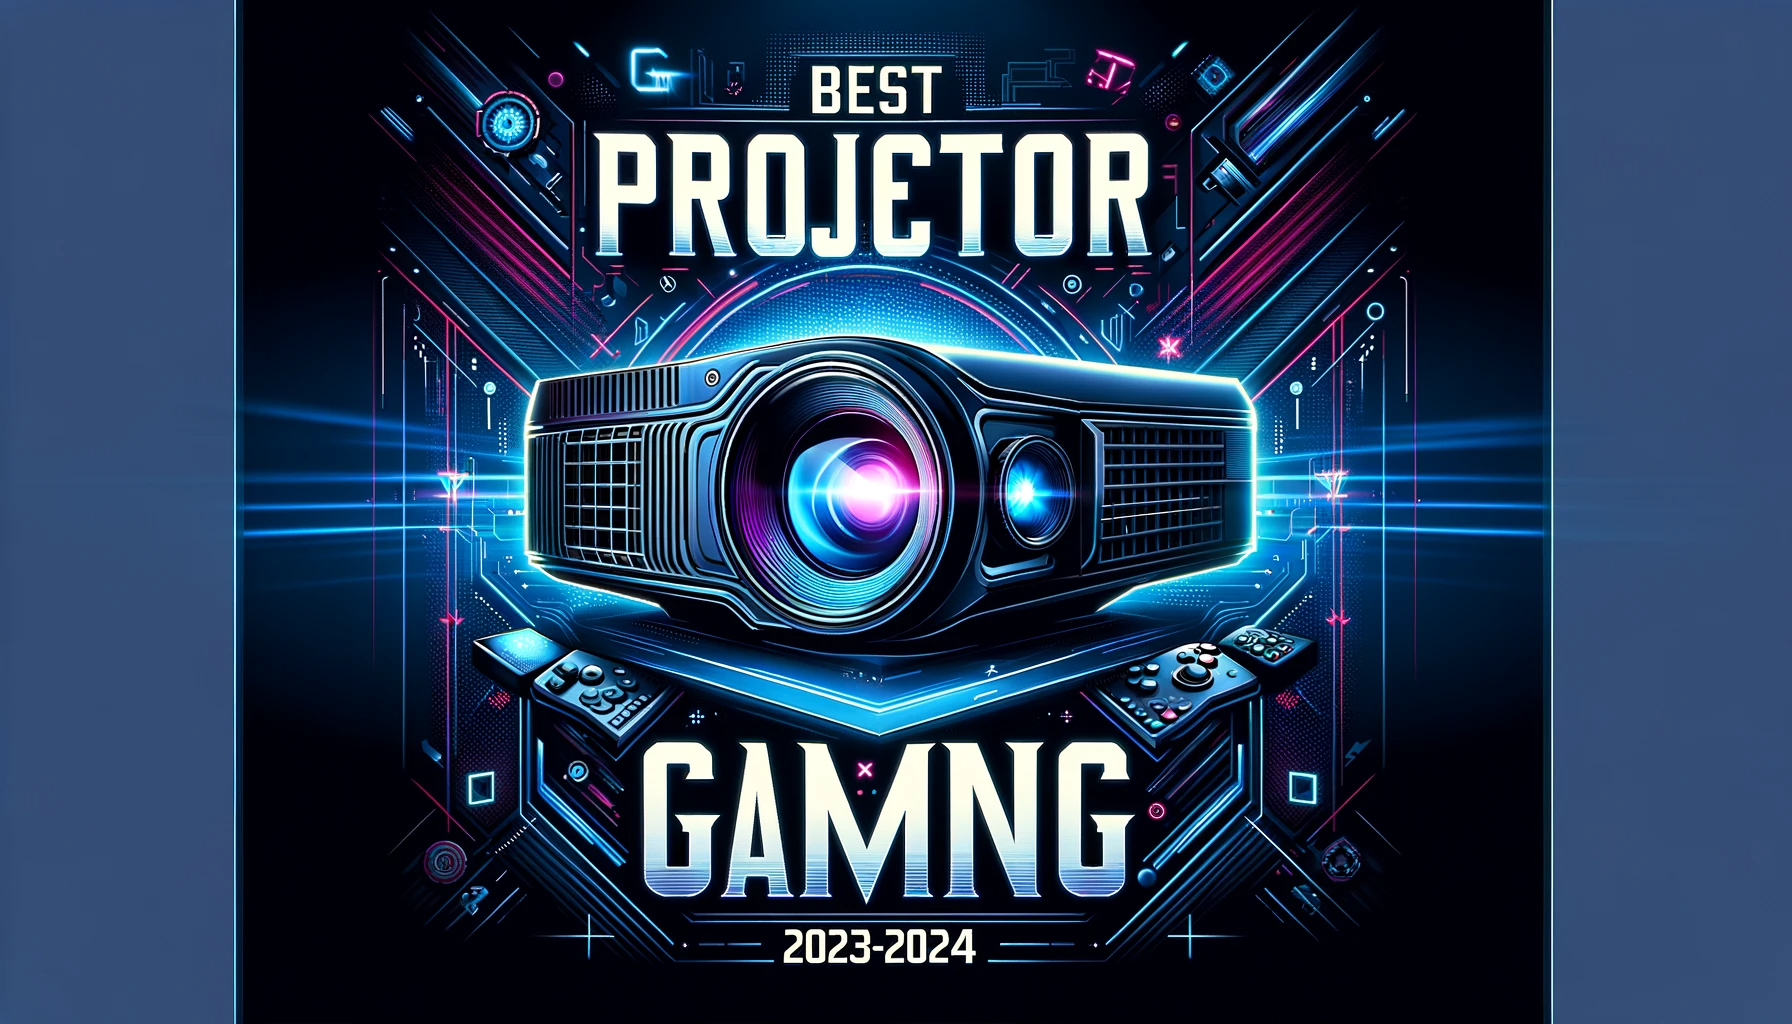 Best Projector For Gaming In 2023-2024